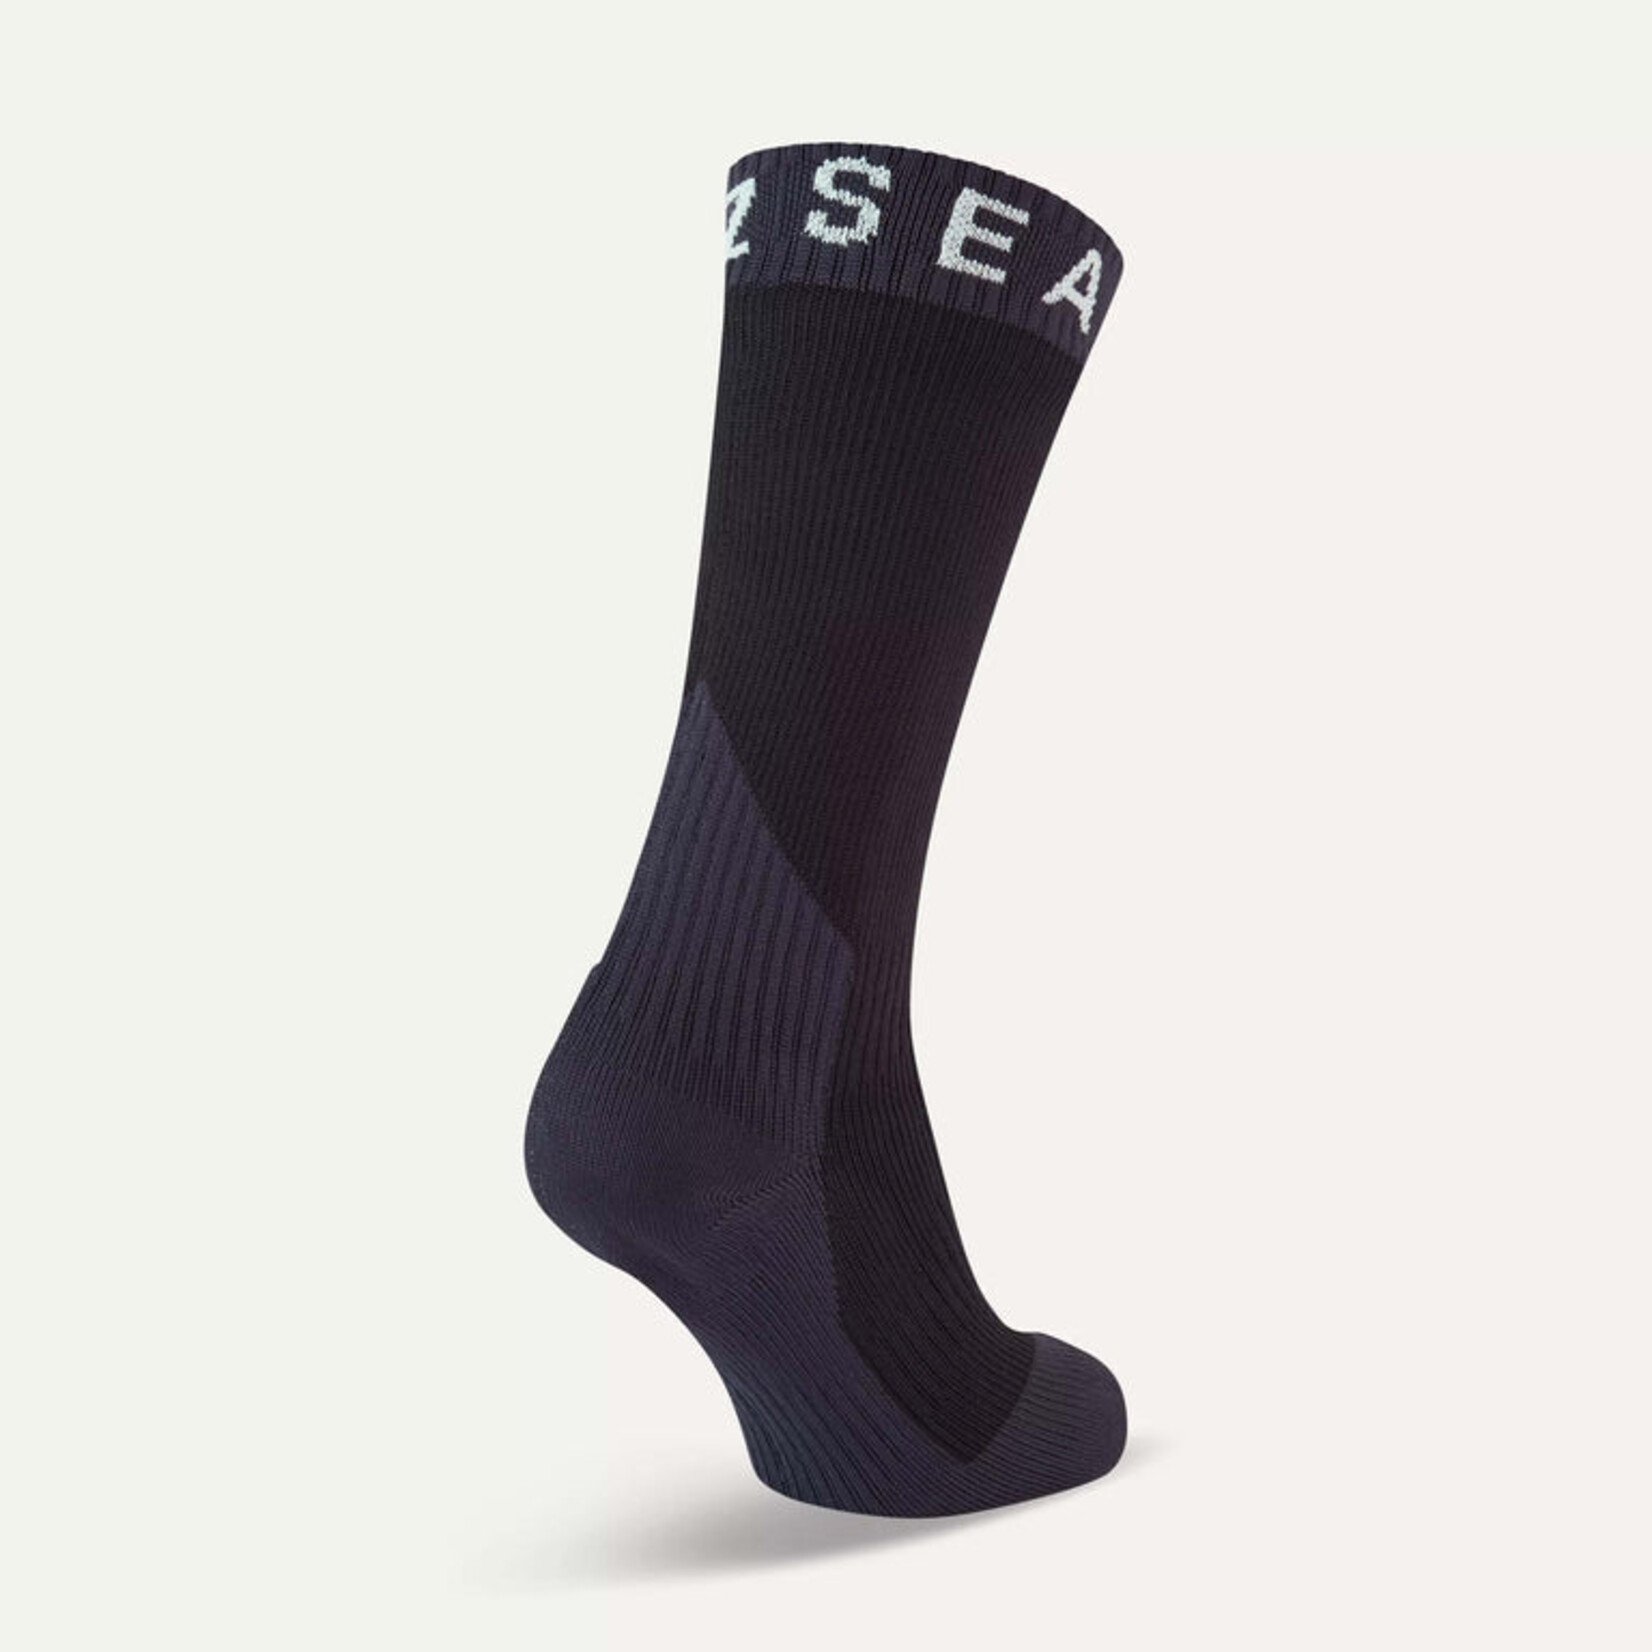 SealSkinz SealSkinz STANFIELD Waterproof Extreme Cold Weather Mid Length Sock